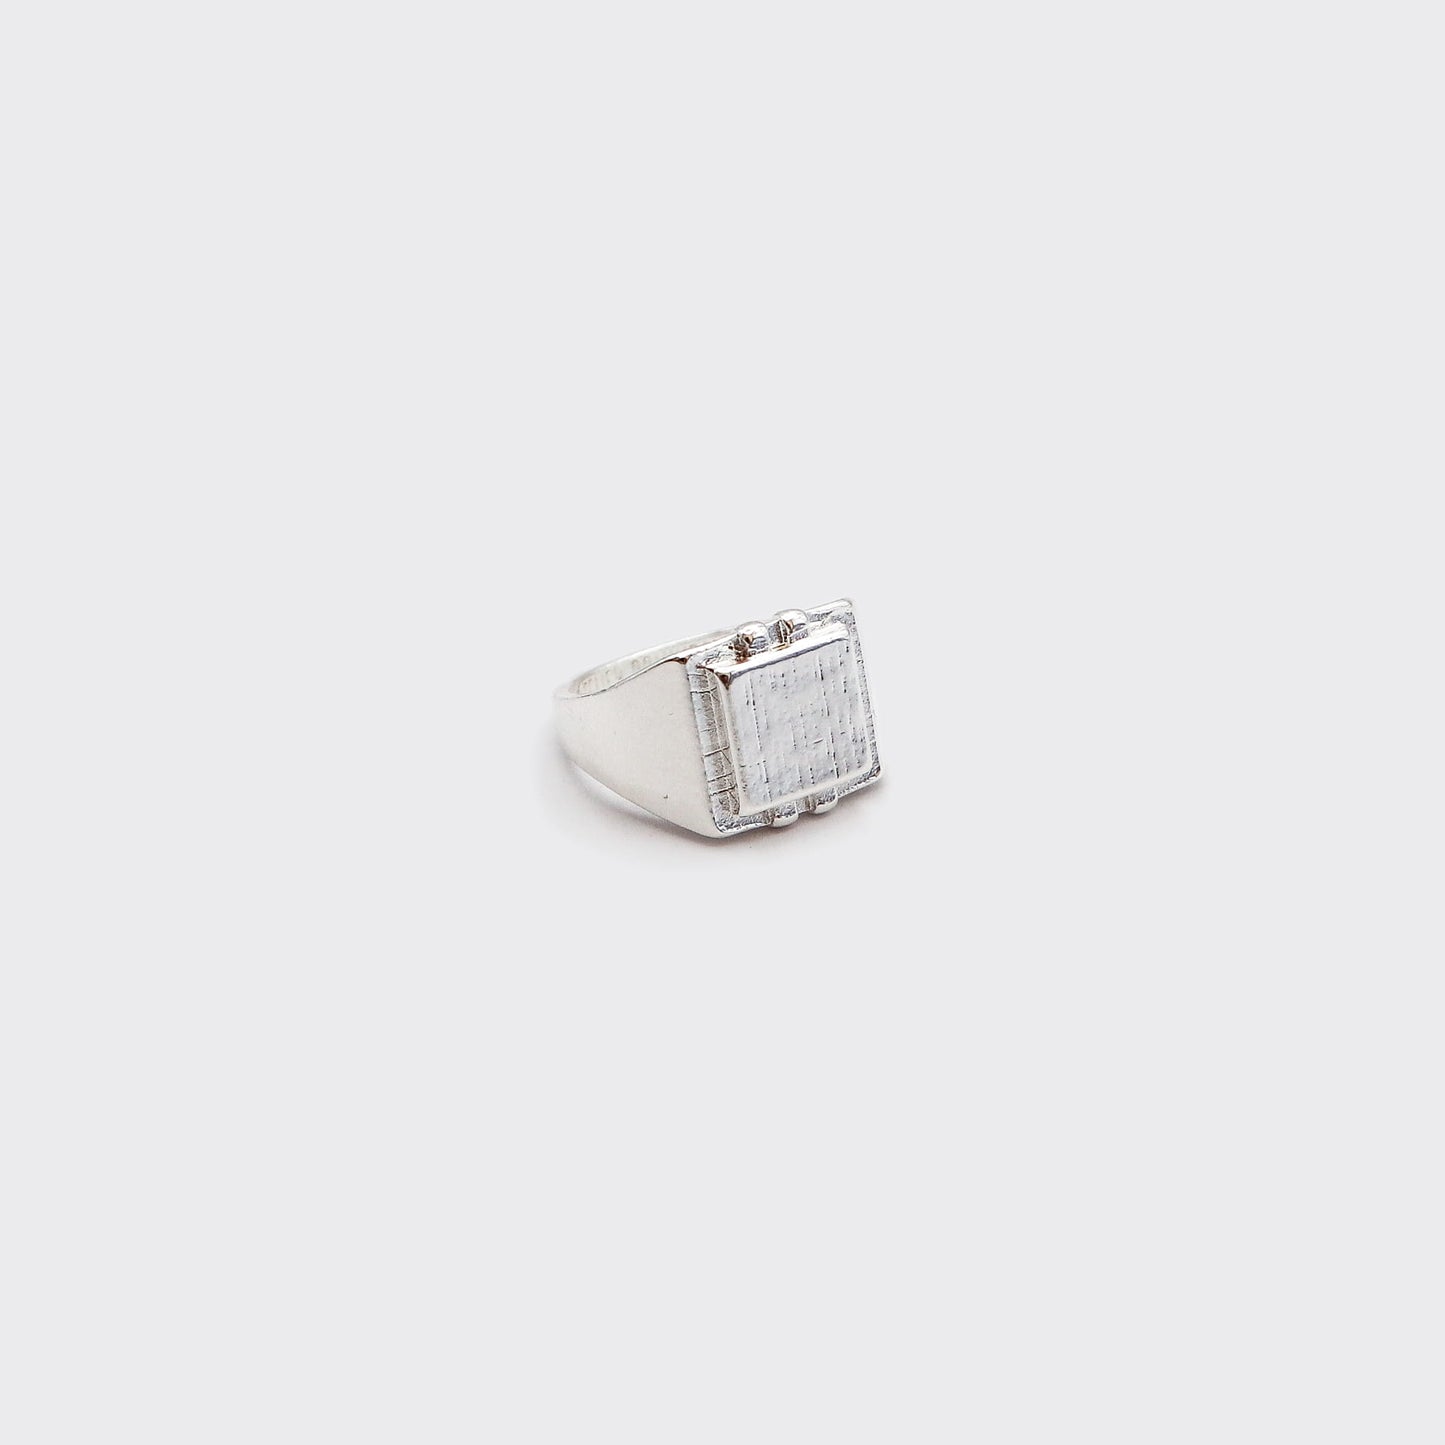 Atelier Domingo's Square ring is a promise of timeless elegance. This ring has been designed in France and is made in Spain, for both men and women. Handcrafted for a vintage finishing, this jewelry is made of a high-quality 925 Sterling silver plating.